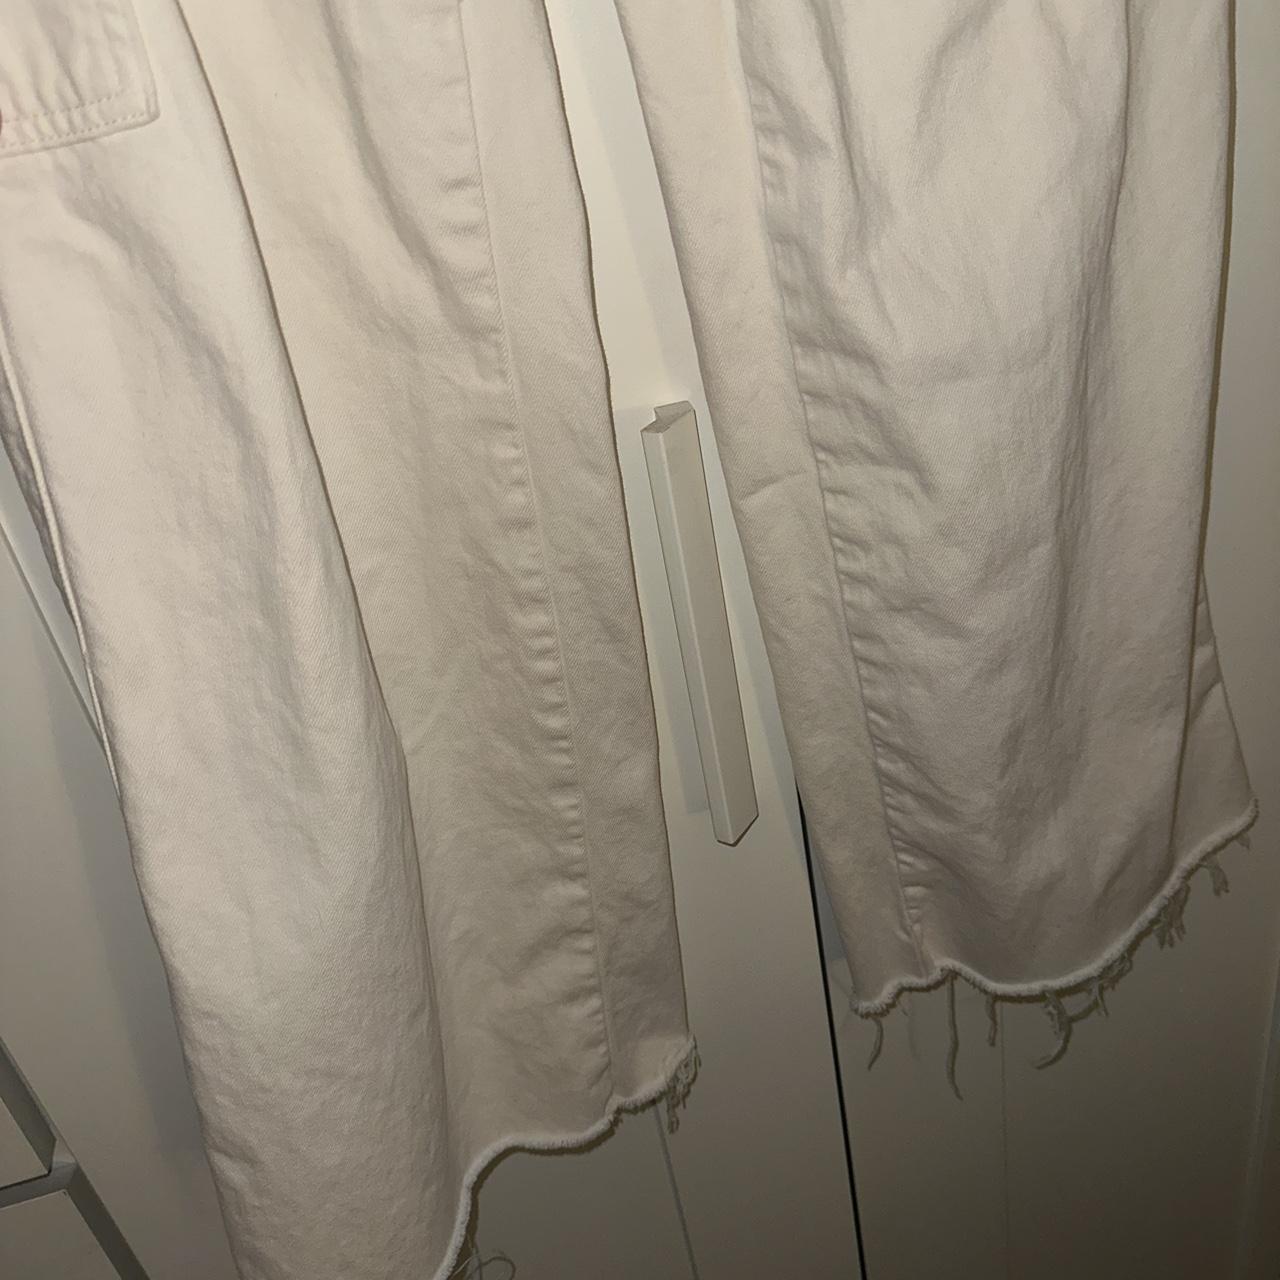 subdued white / cream low waist cargos size small,... - Depop